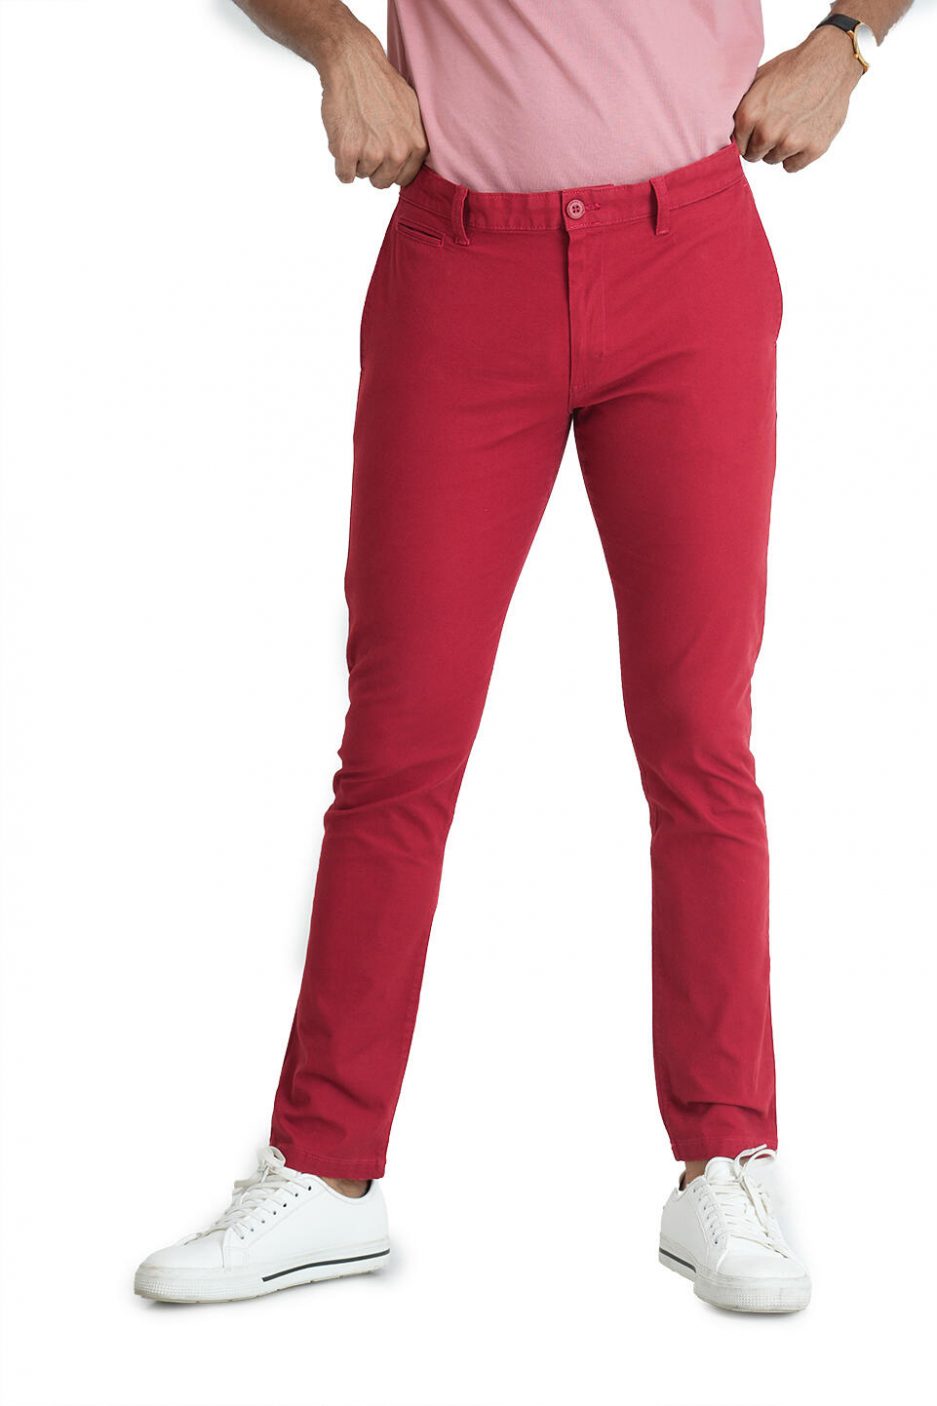 Mens pants chinos  dark red P830  MODONE wholesale  Clothing For Men